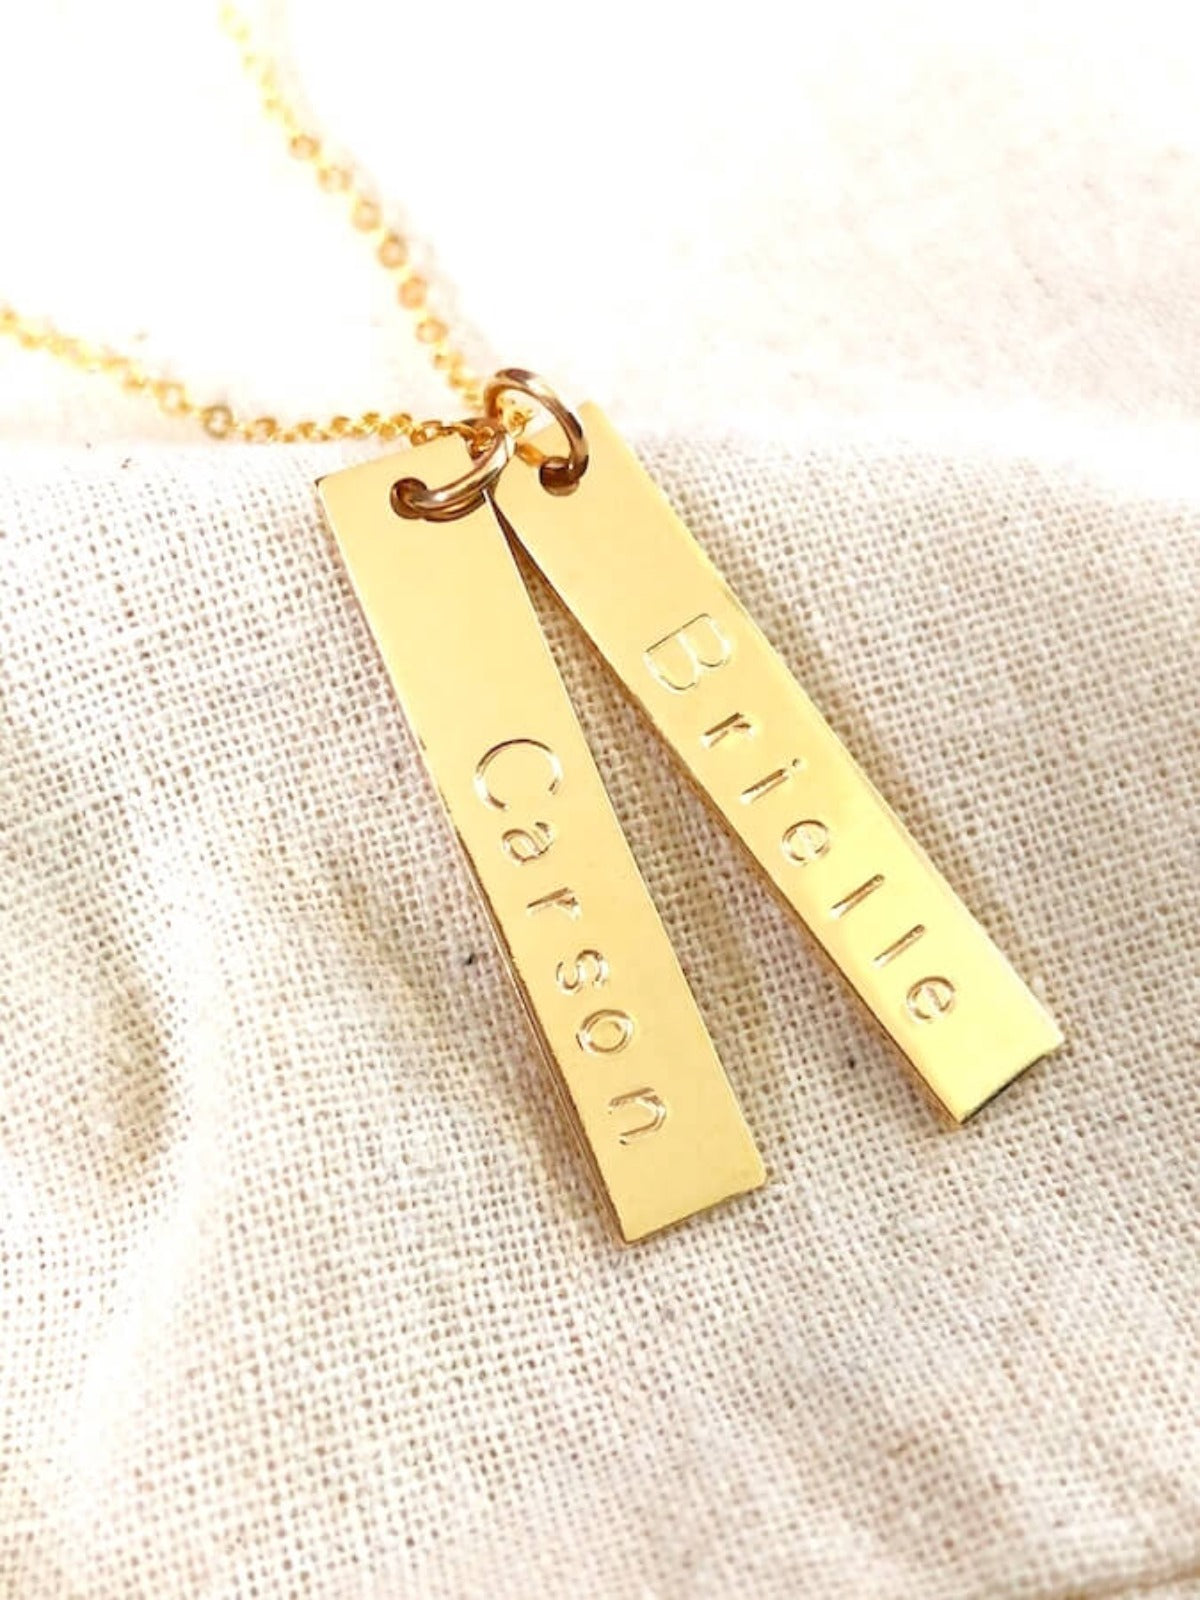 Tully - Vertical Bar Pendant Name Necklace